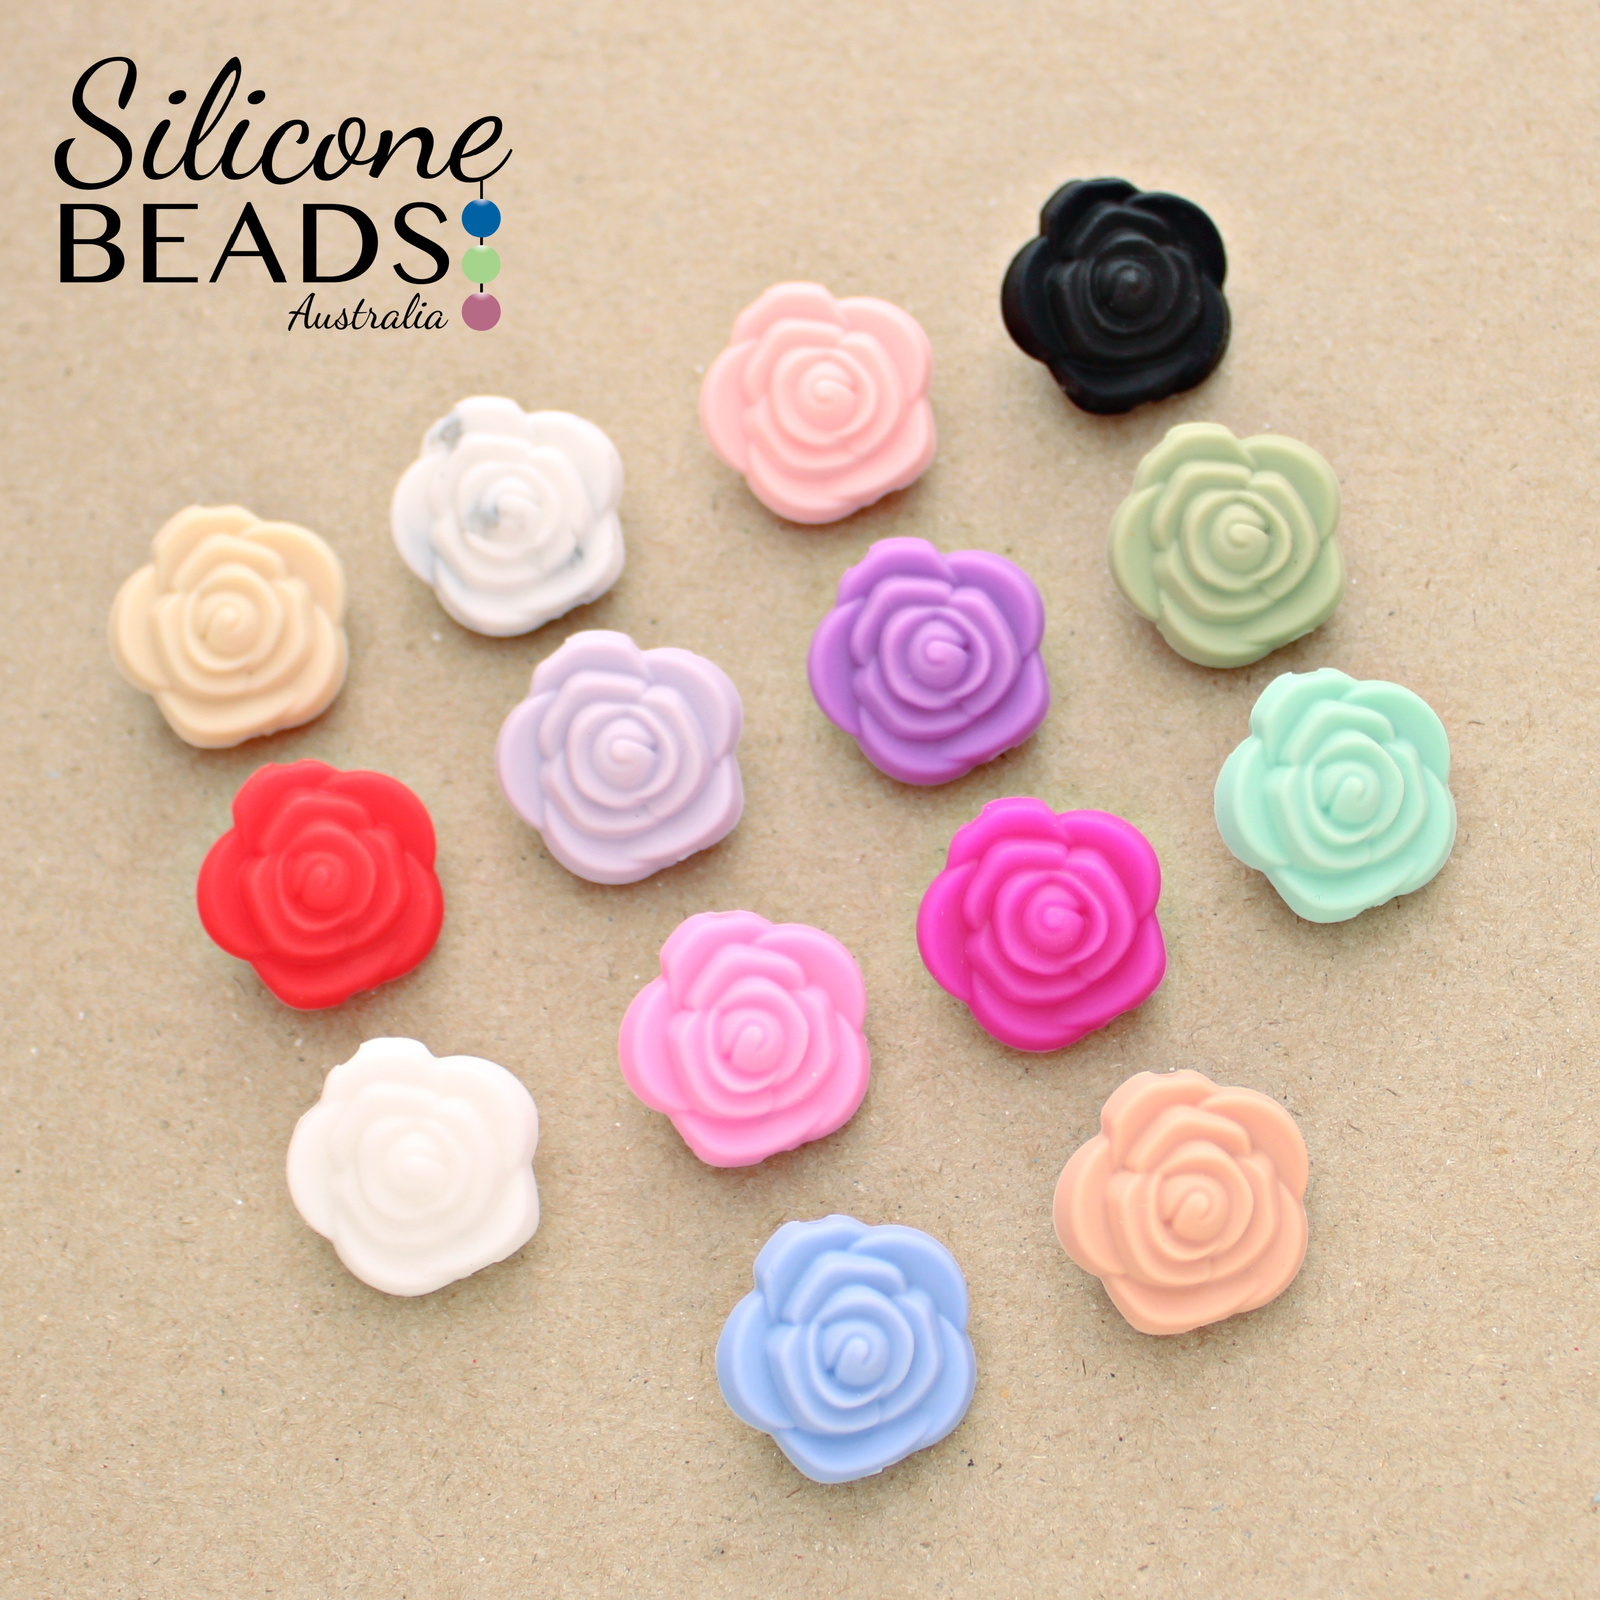 15mm Floral Garden Print Silicone Bead, Printed Silicone Beads